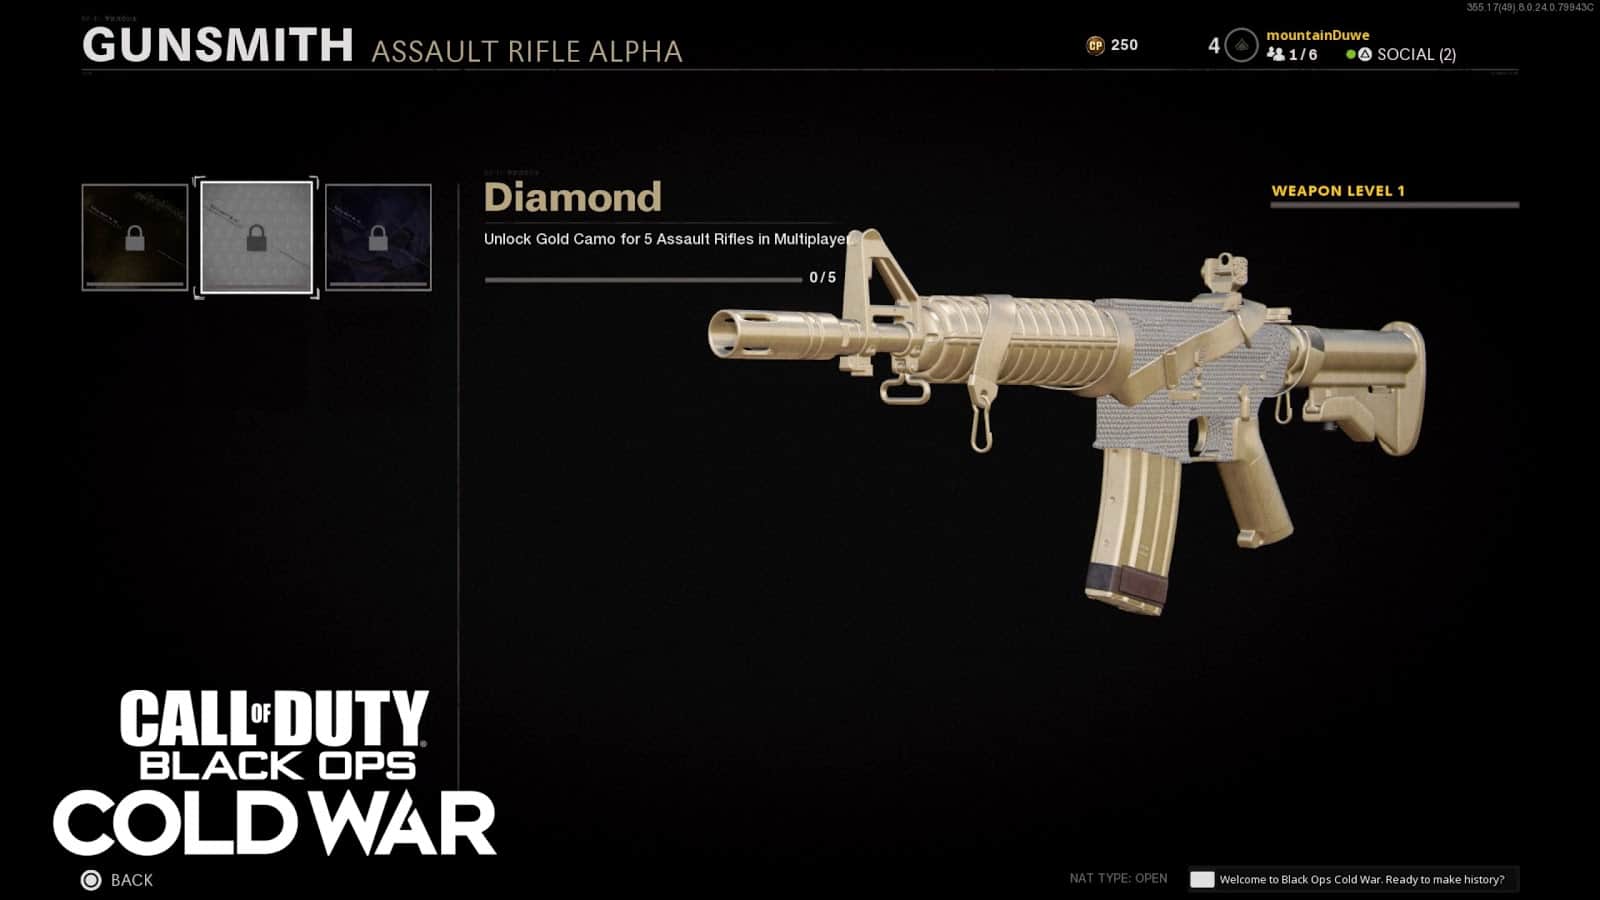 CoD: How To Unlock Gold, Diamond And Dark Matter Camos In Black Ops Cold War